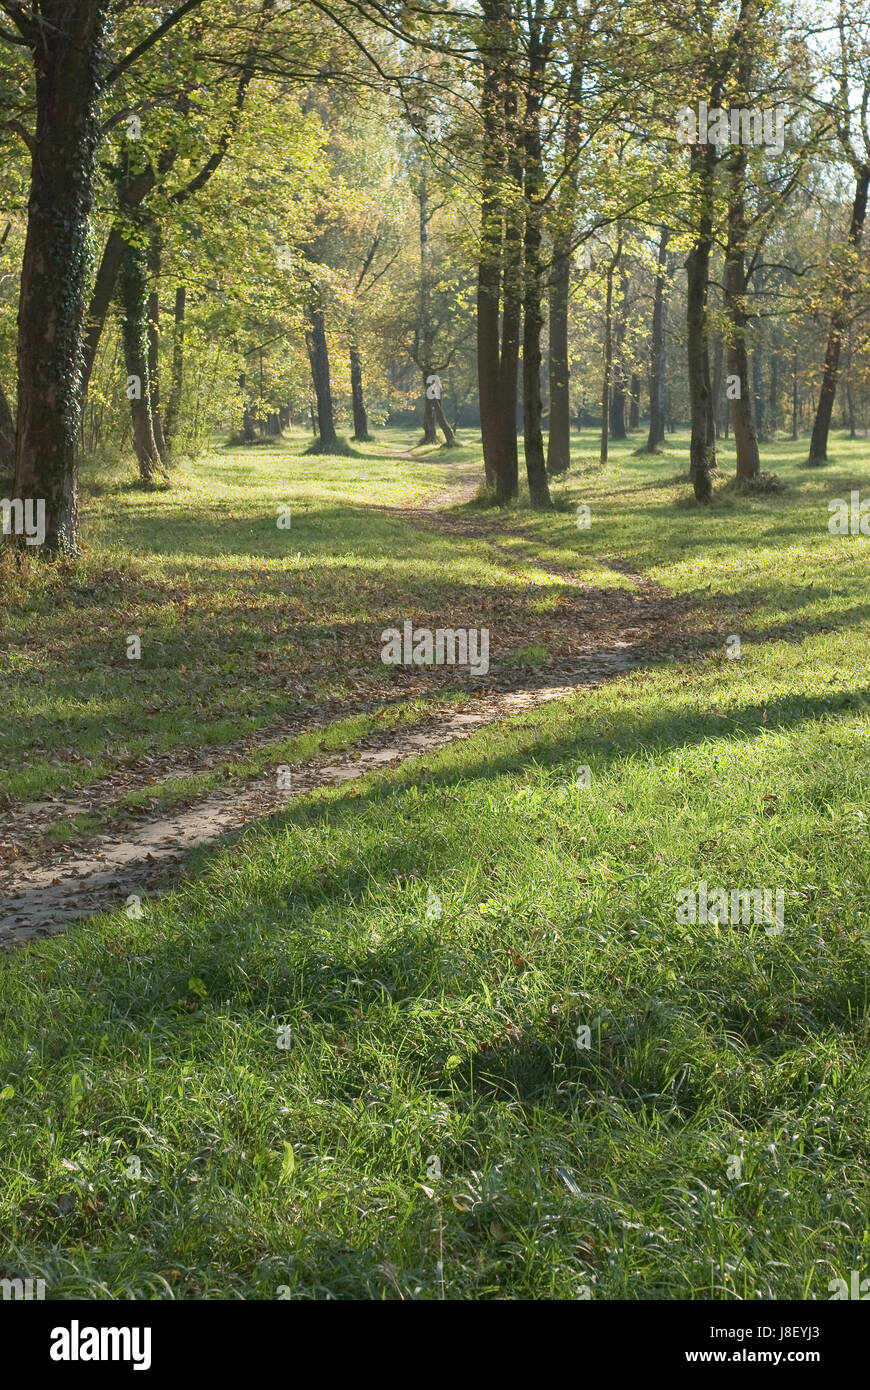 trail, landscape, scenery, countryside, nature, wilderness, woodland, rural, Stock Photo